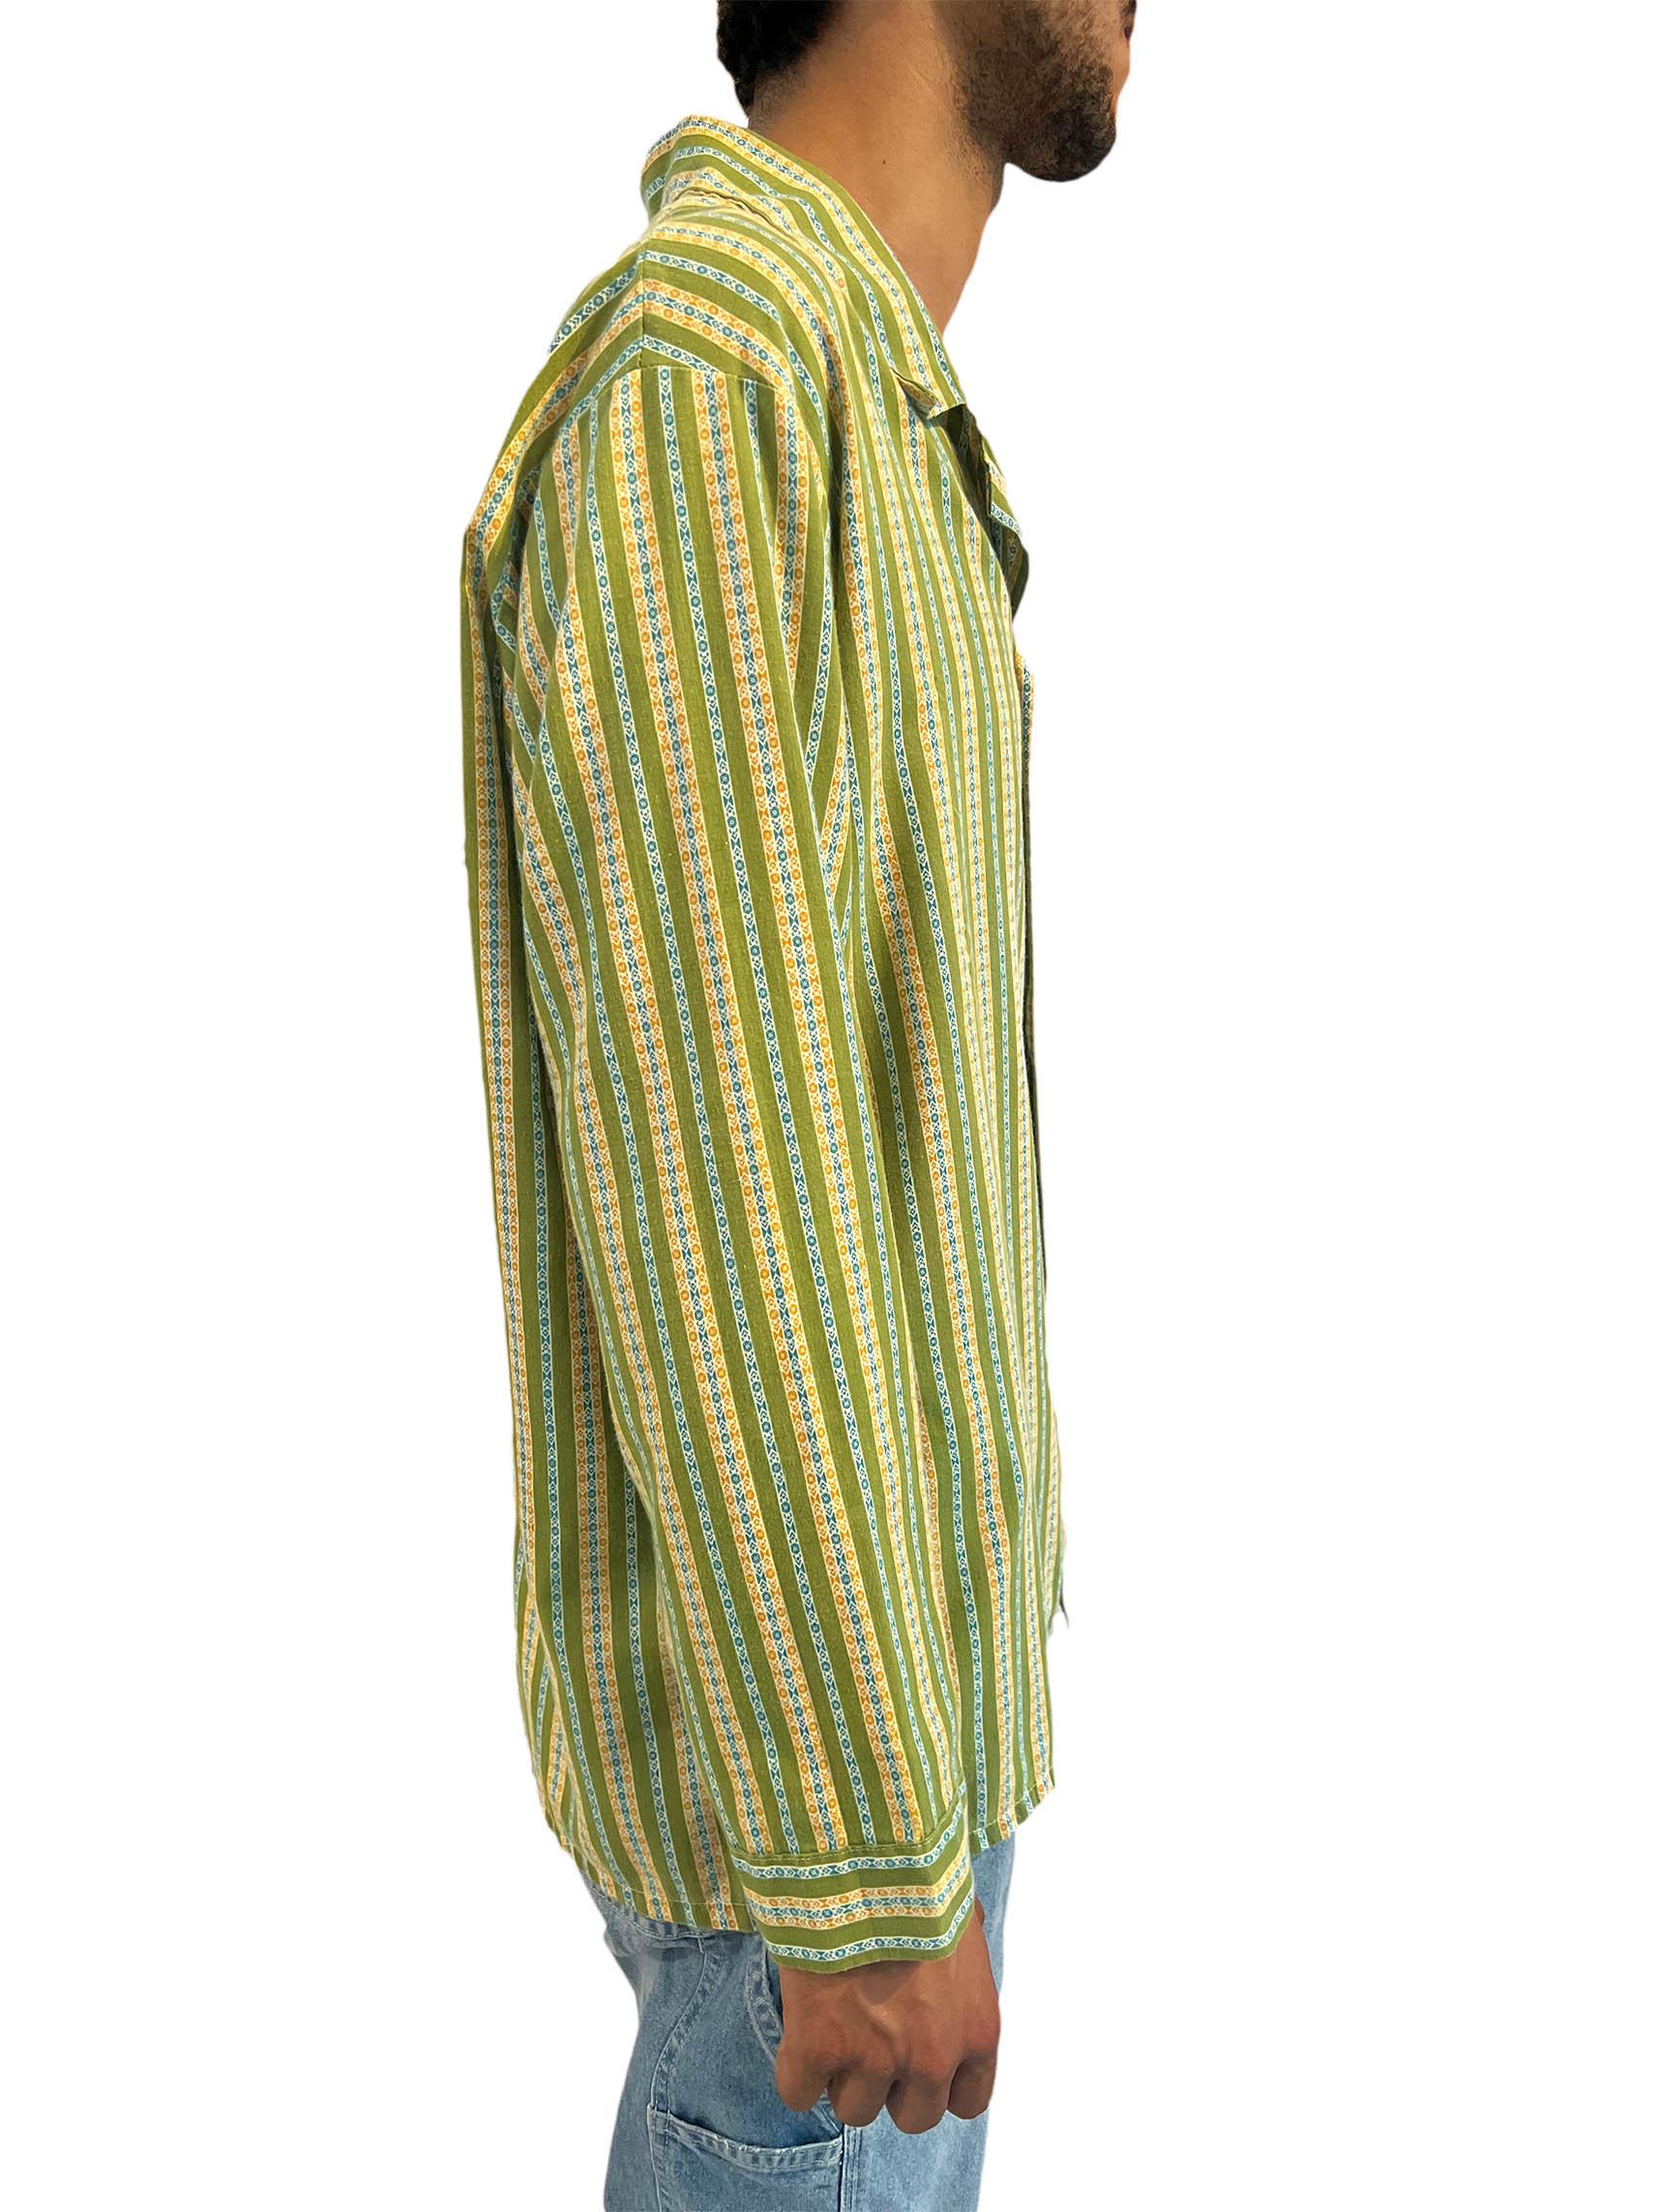 yellow and green striped shirt